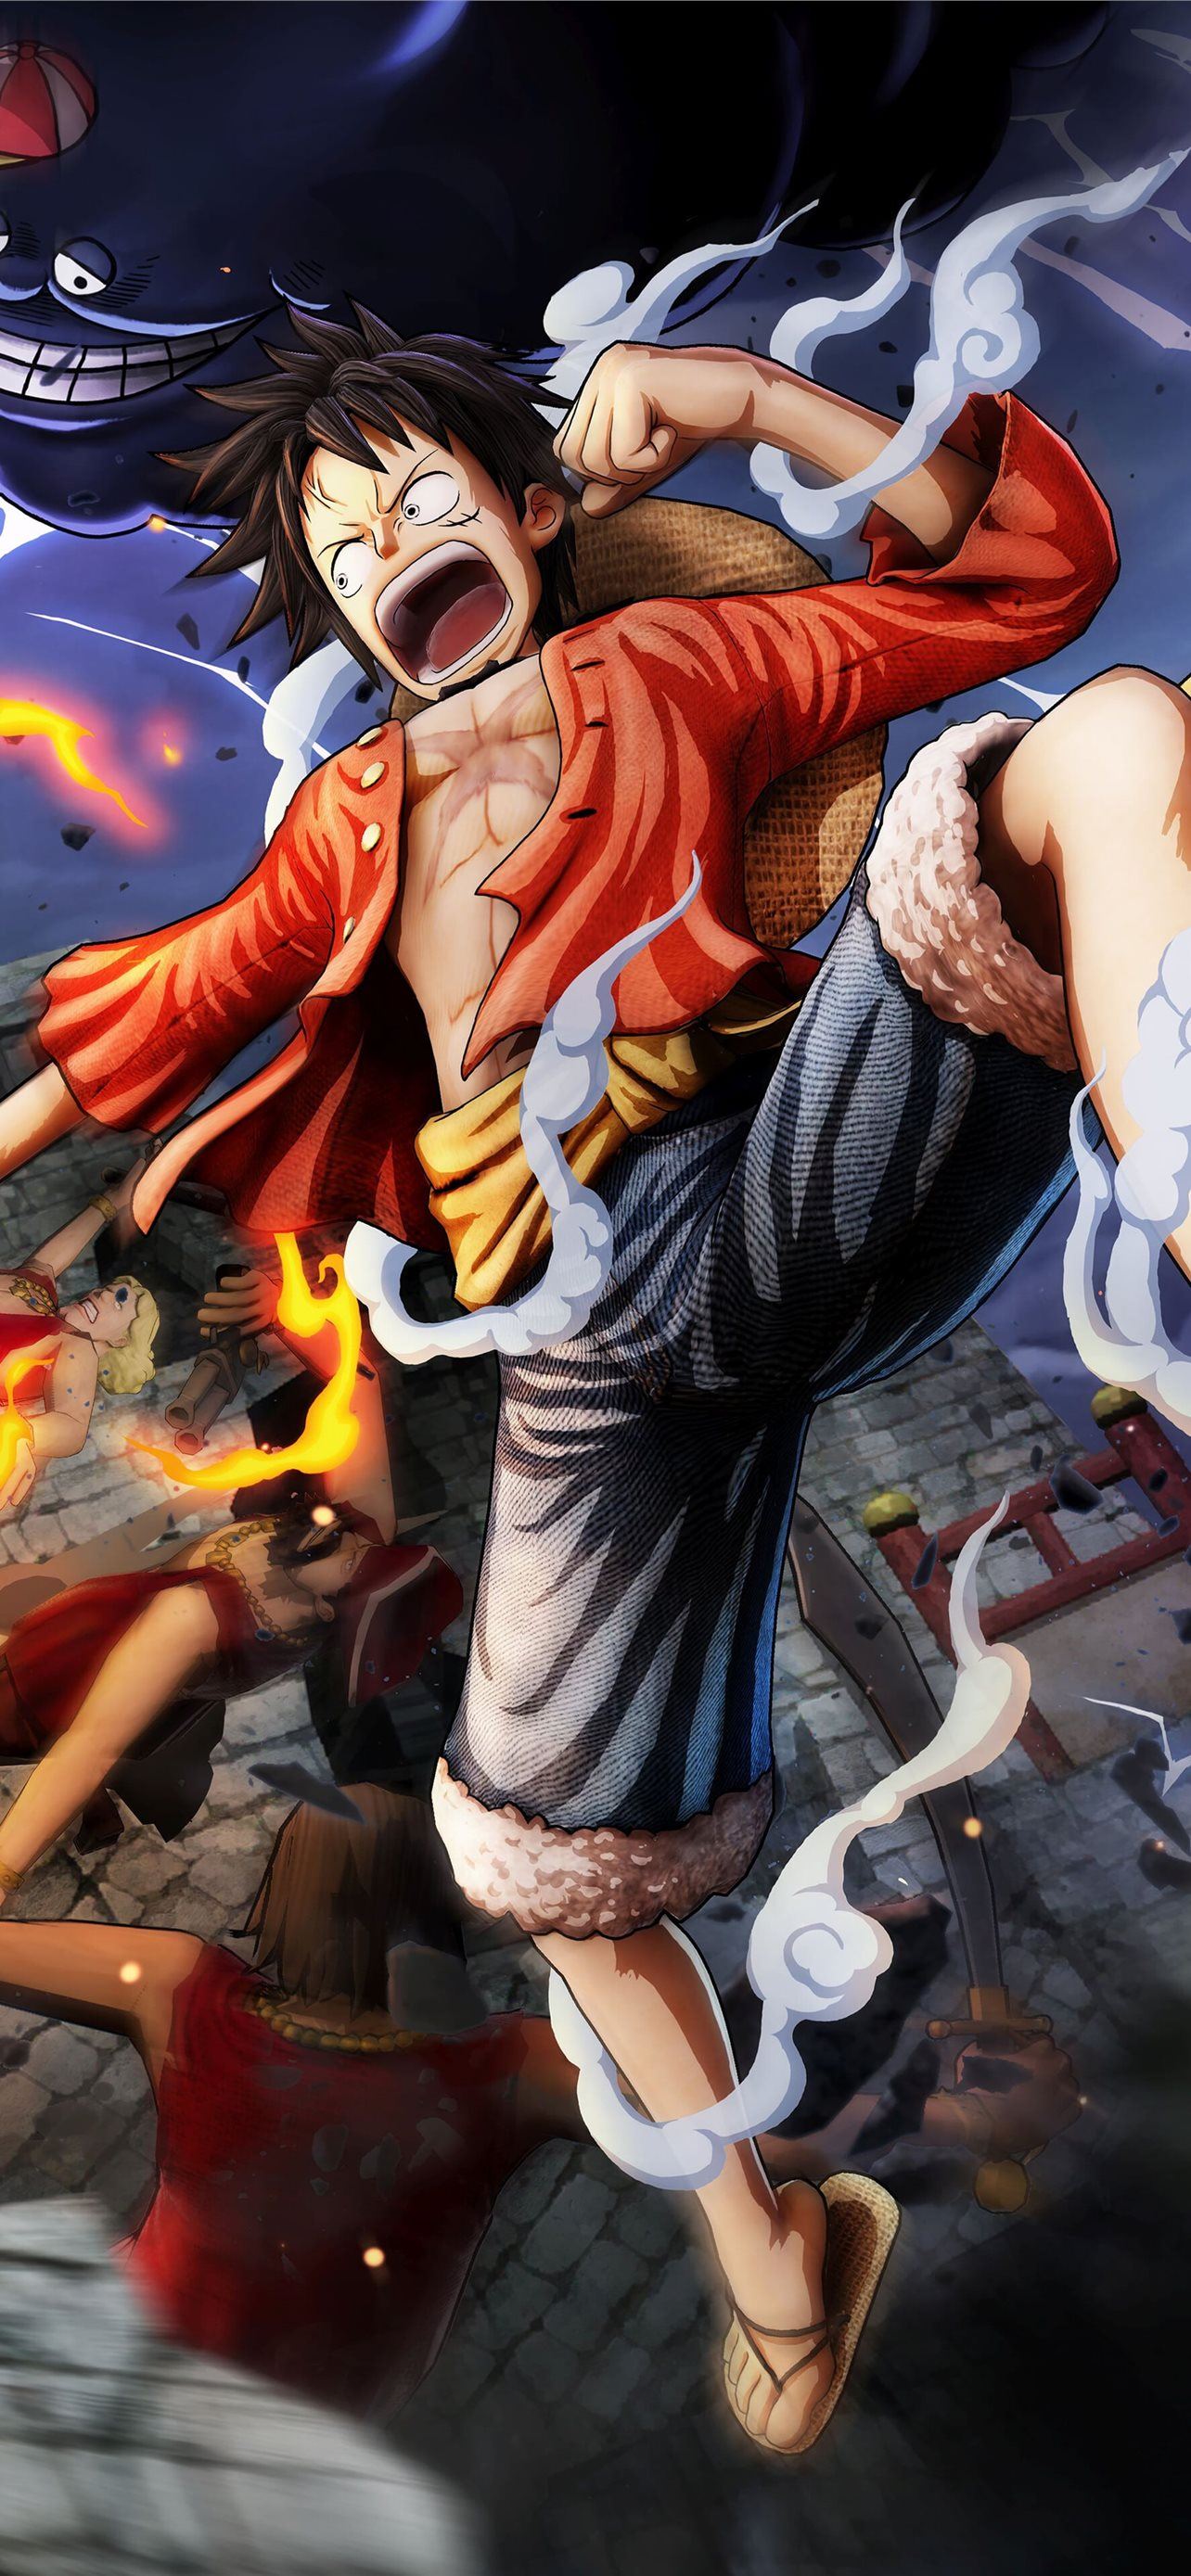 One Piece Anime Wallpapers